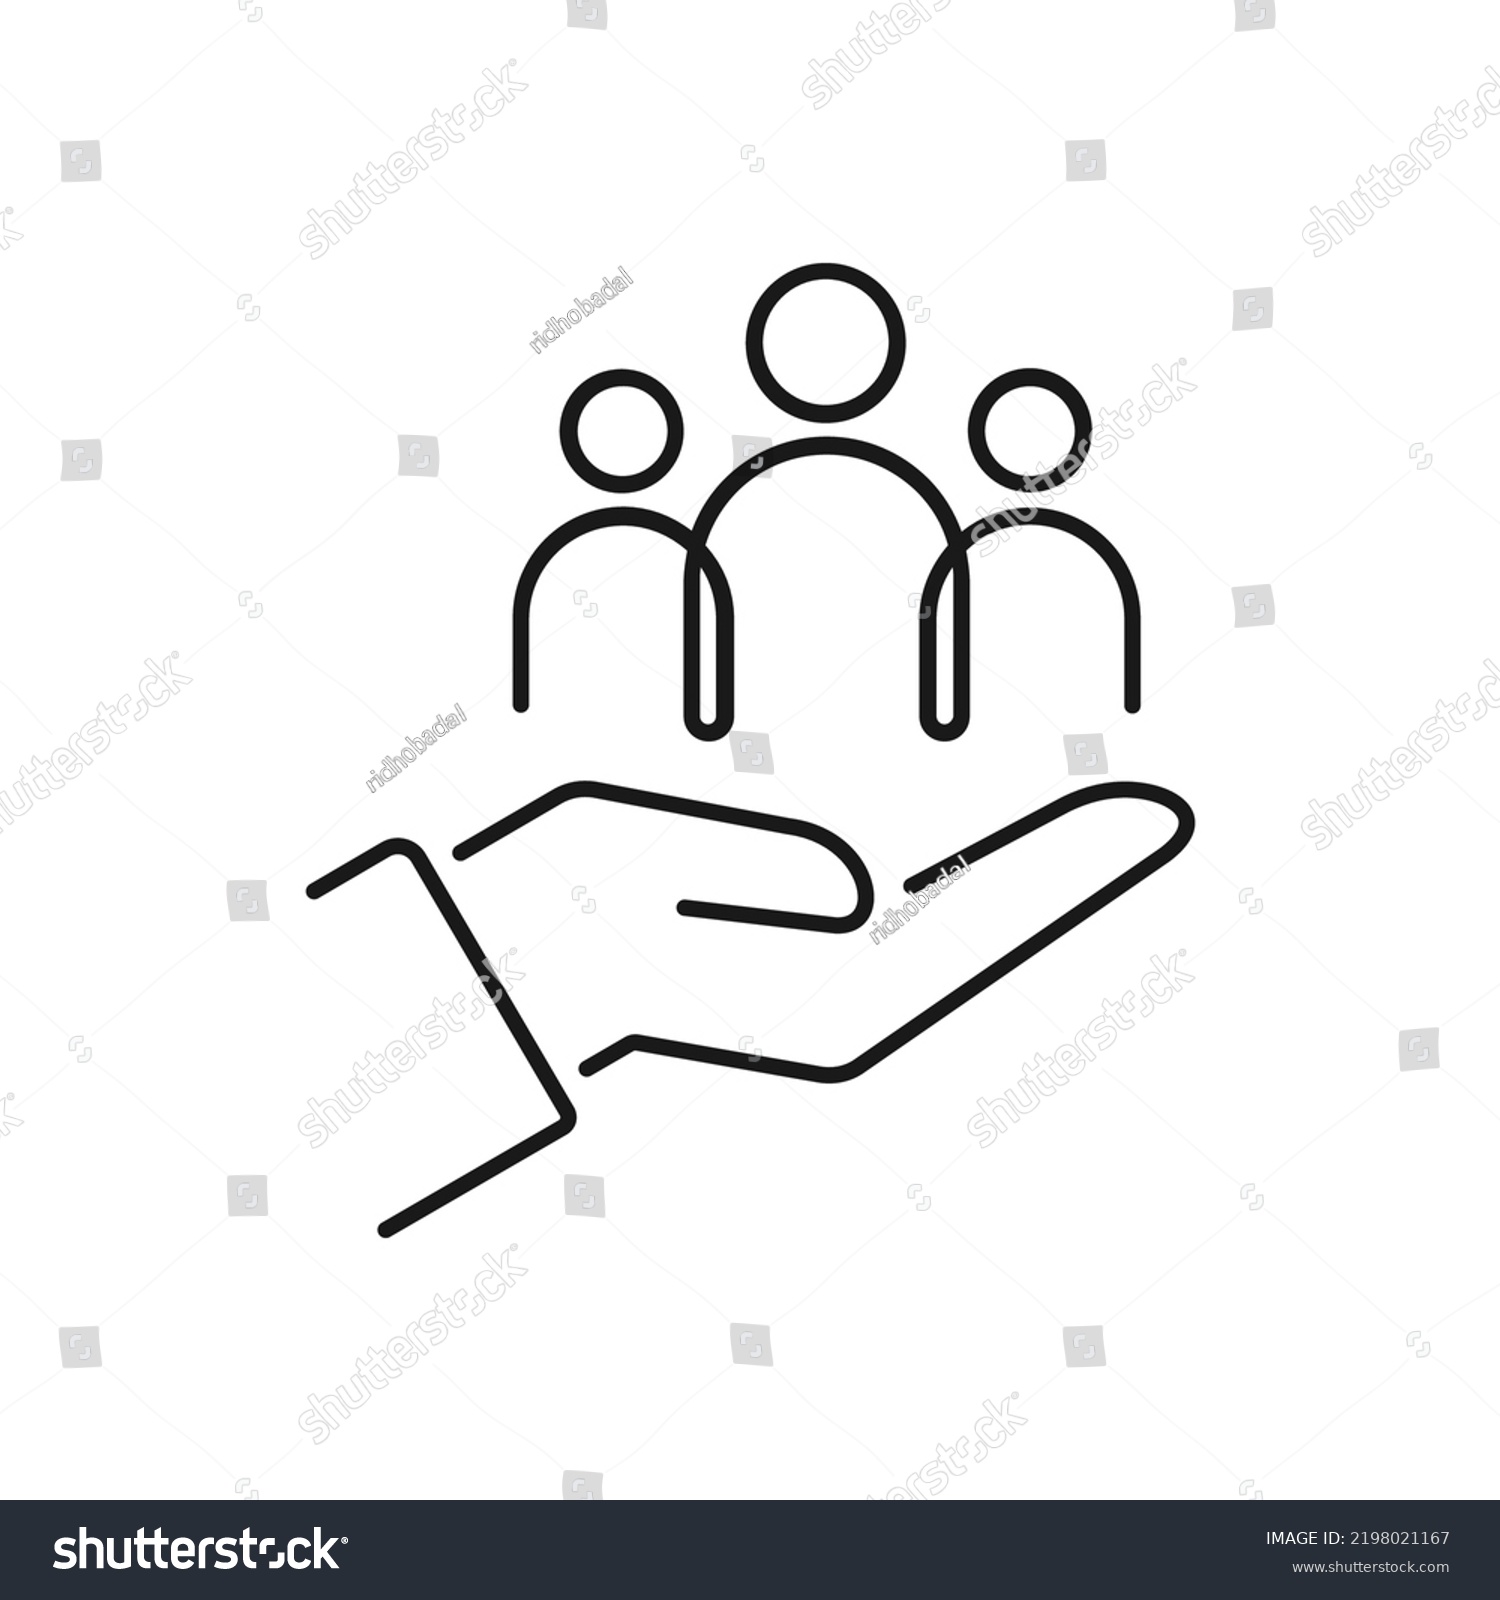 SVG of inclusion social equity icon, help or support employee, gender equality, community care, age and culture diversity, people group save, thin line symbol - editable color.  vector illustration svg